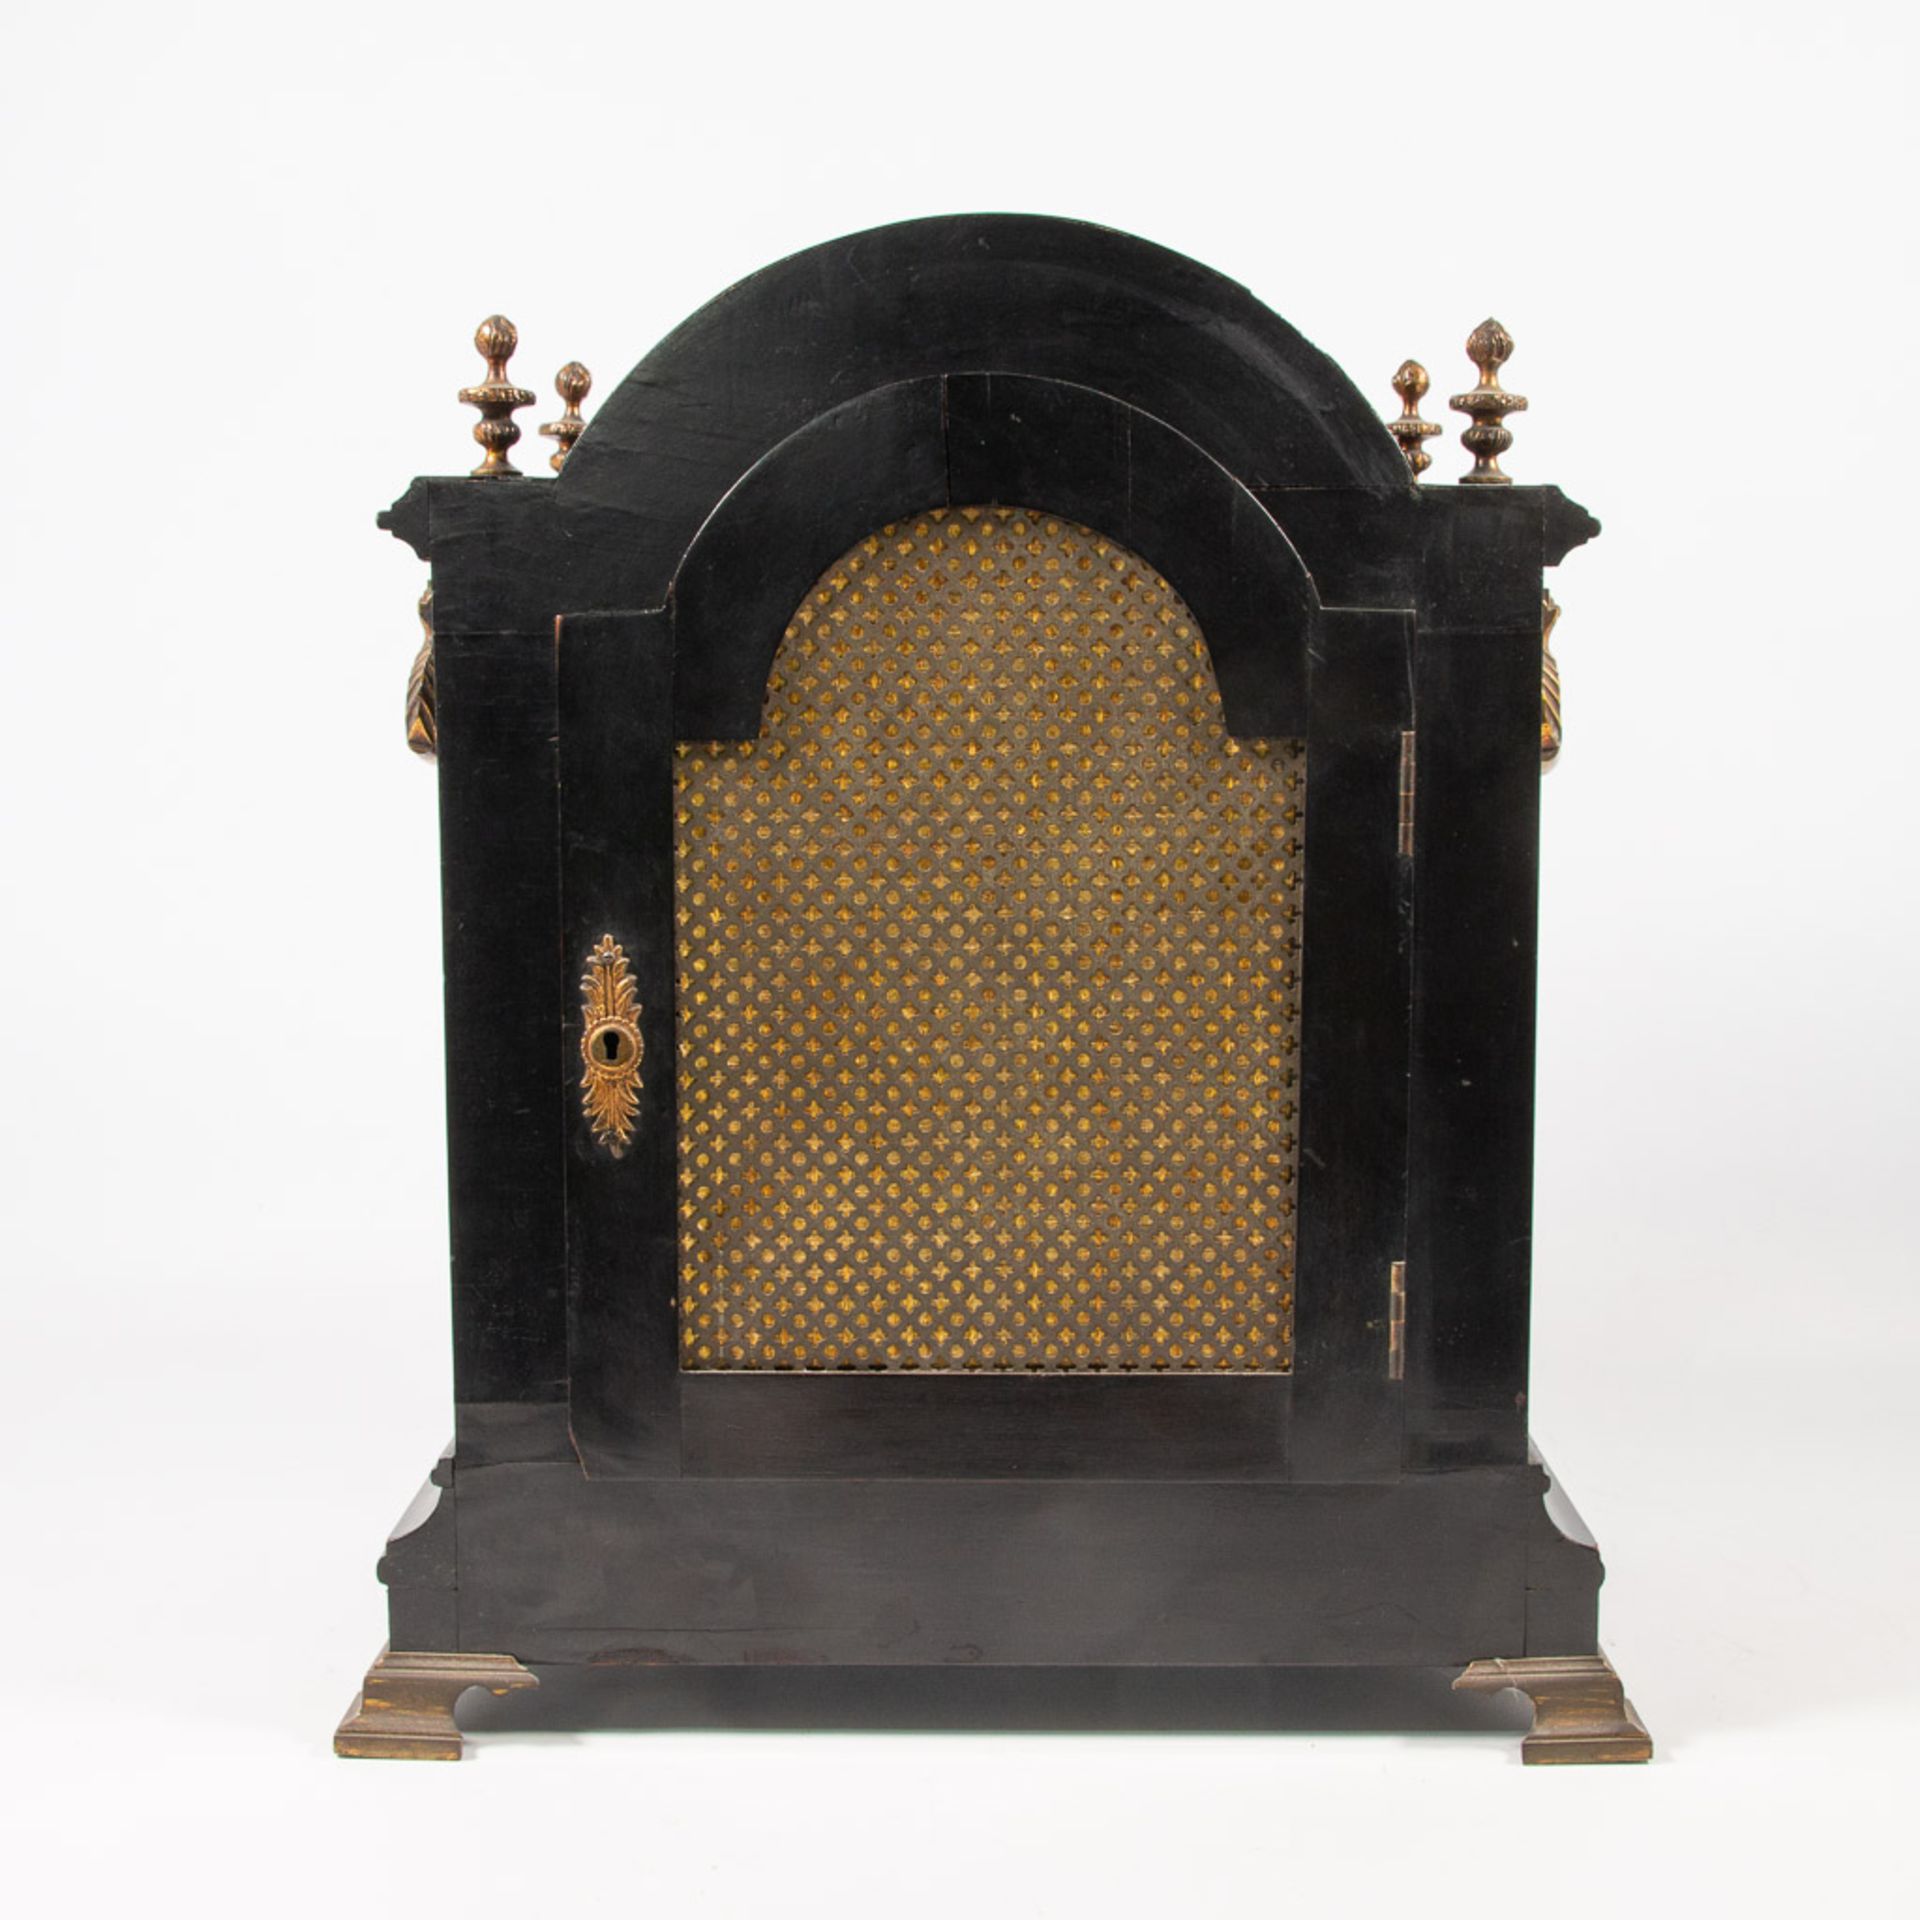 A tableclock with musical movement, 8 bells - Image 5 of 19